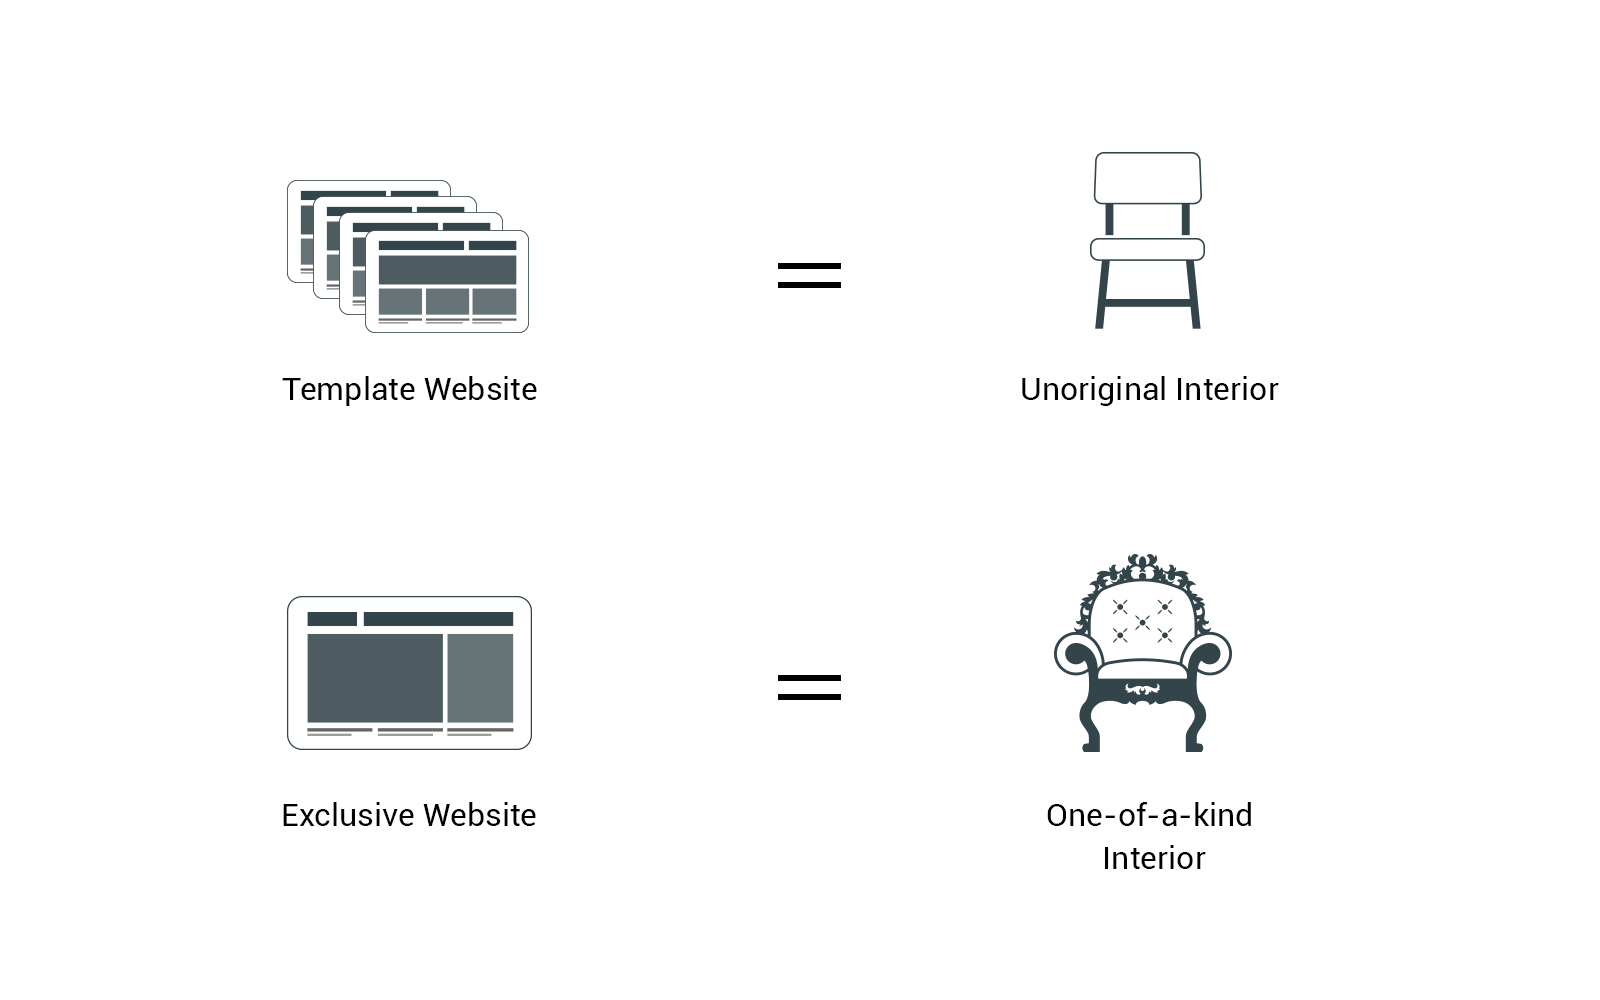 Website image impacts the client’s service expectation